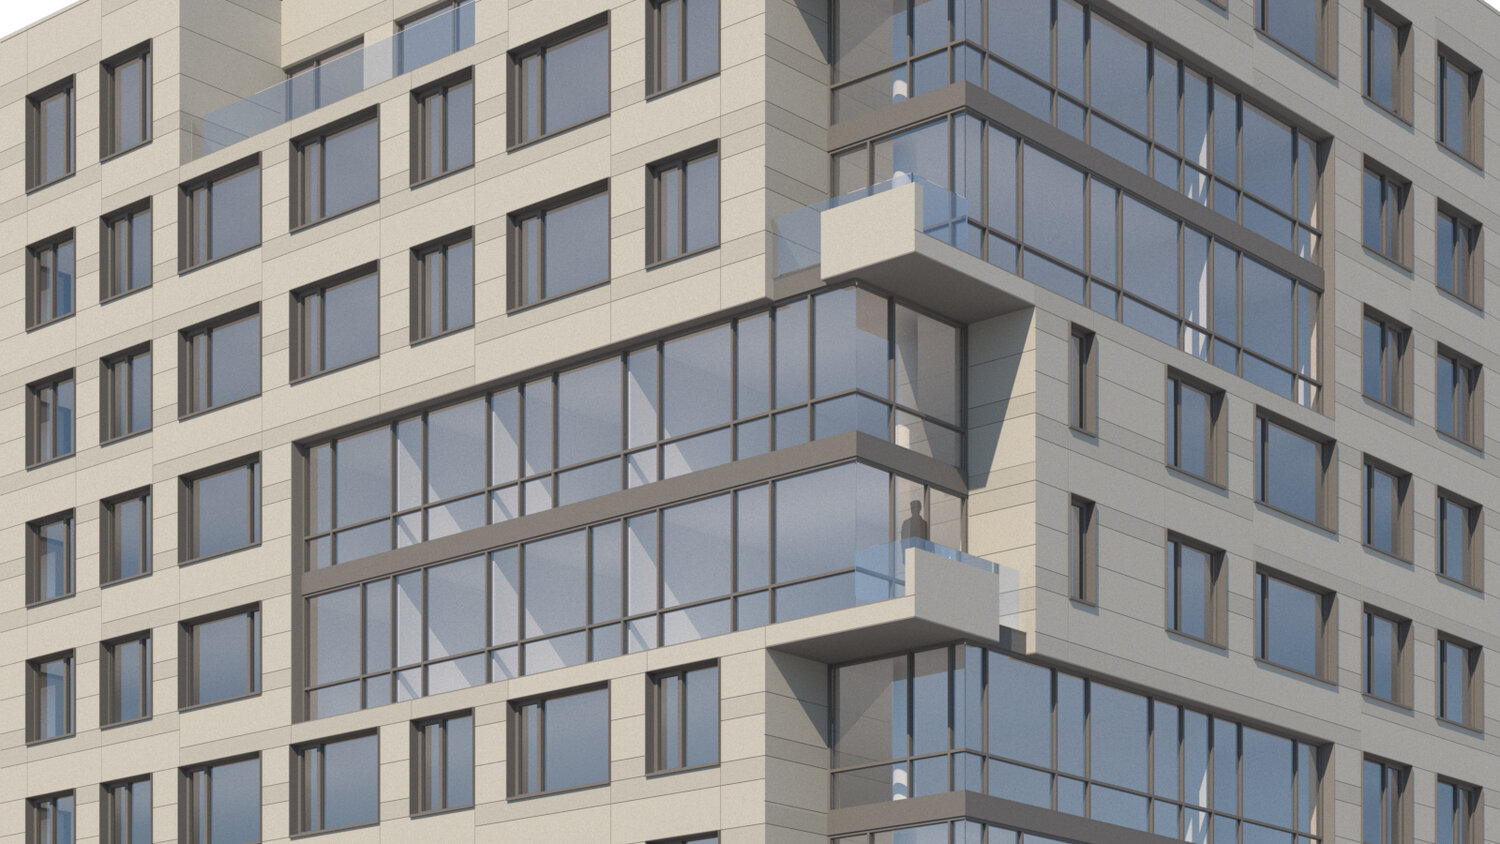 Rendering of facade and residential balconies at 52 Fourth Avenue - Gertler & Wente Architects